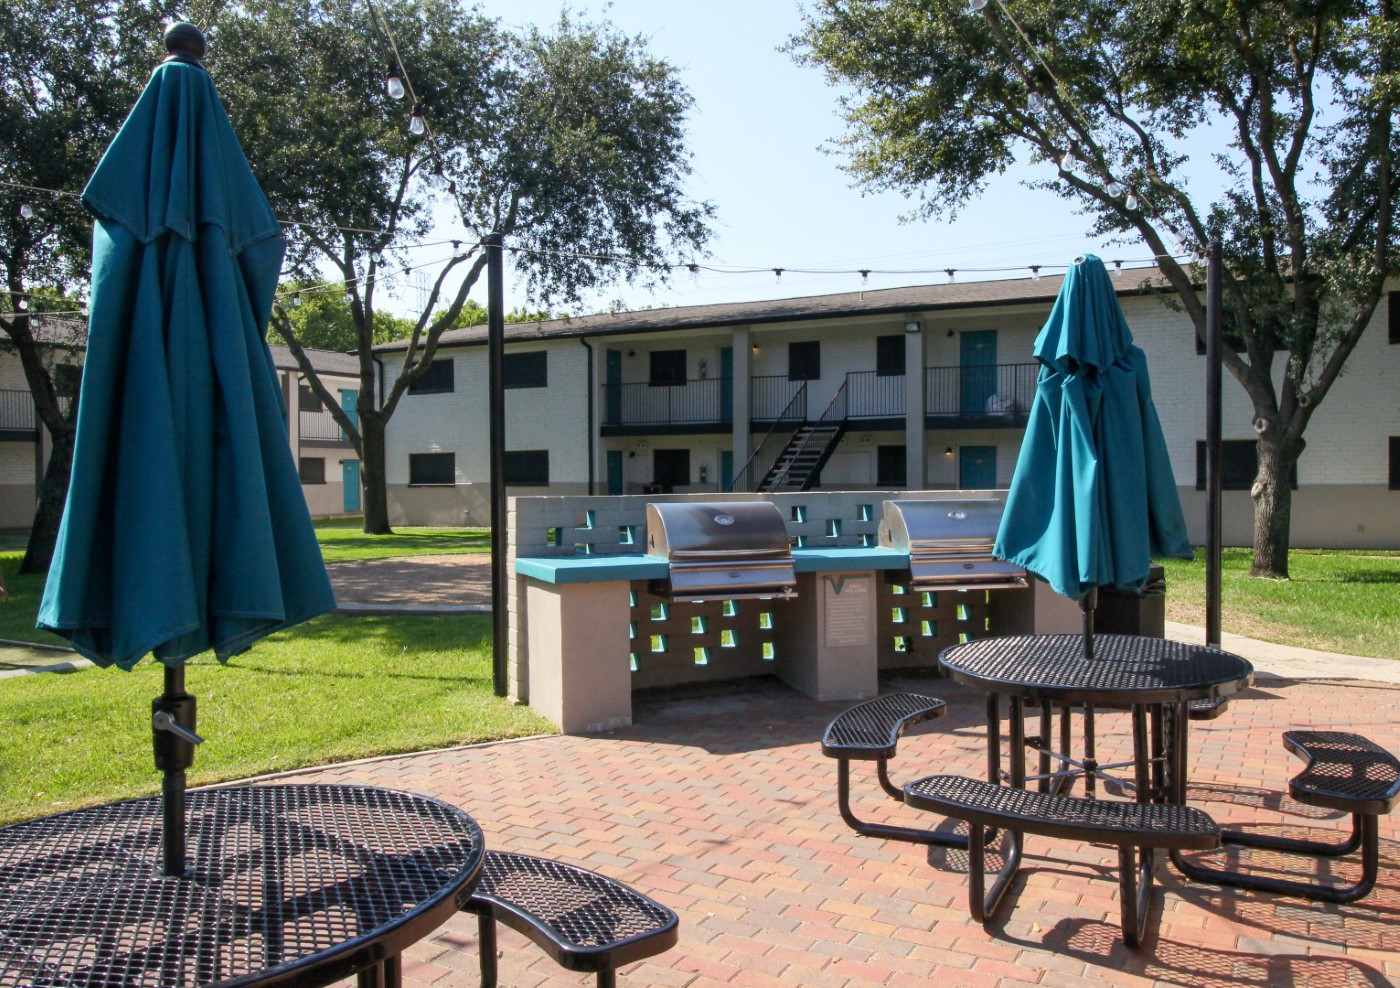 Community Amenities - Courtyard Grilling & Picnic Area